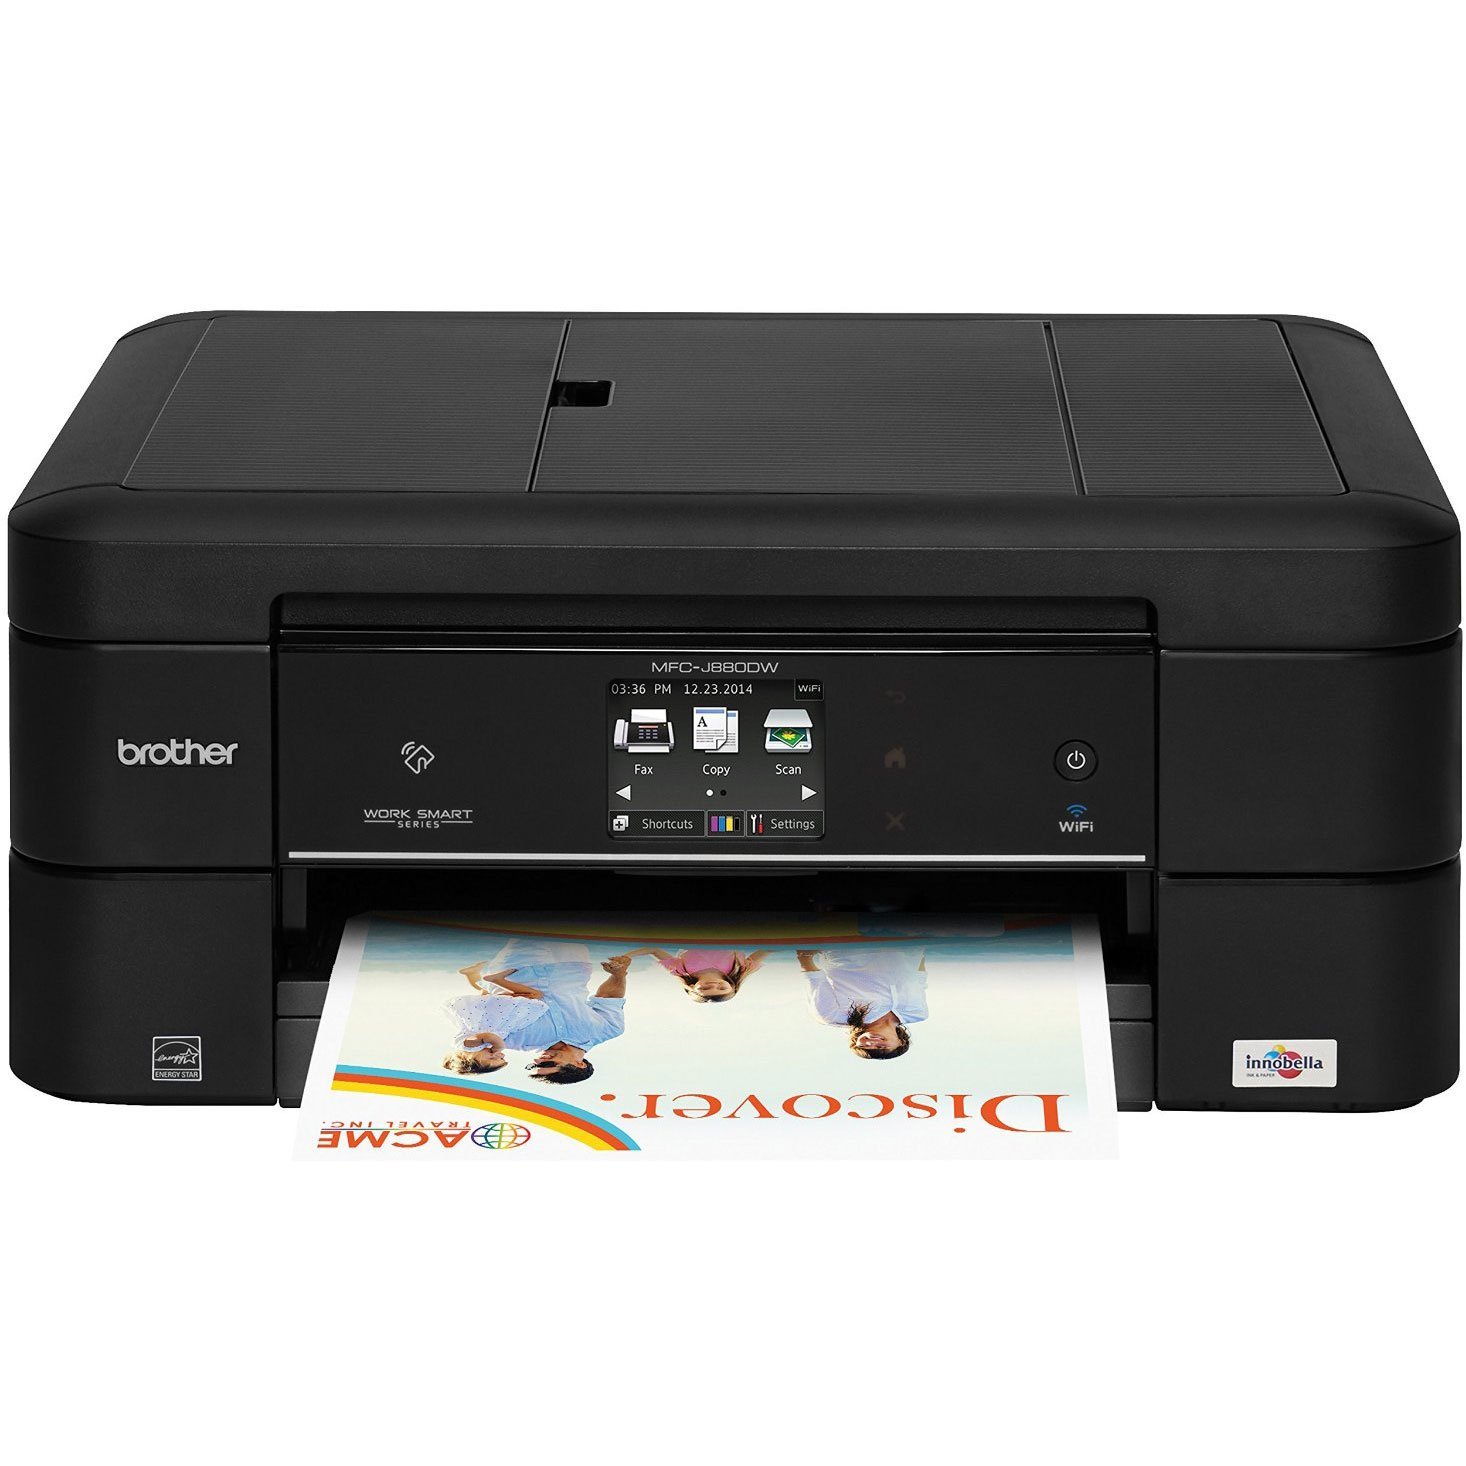 Brother Printer Brother MFC-J885DW Smart Inkjet All In One